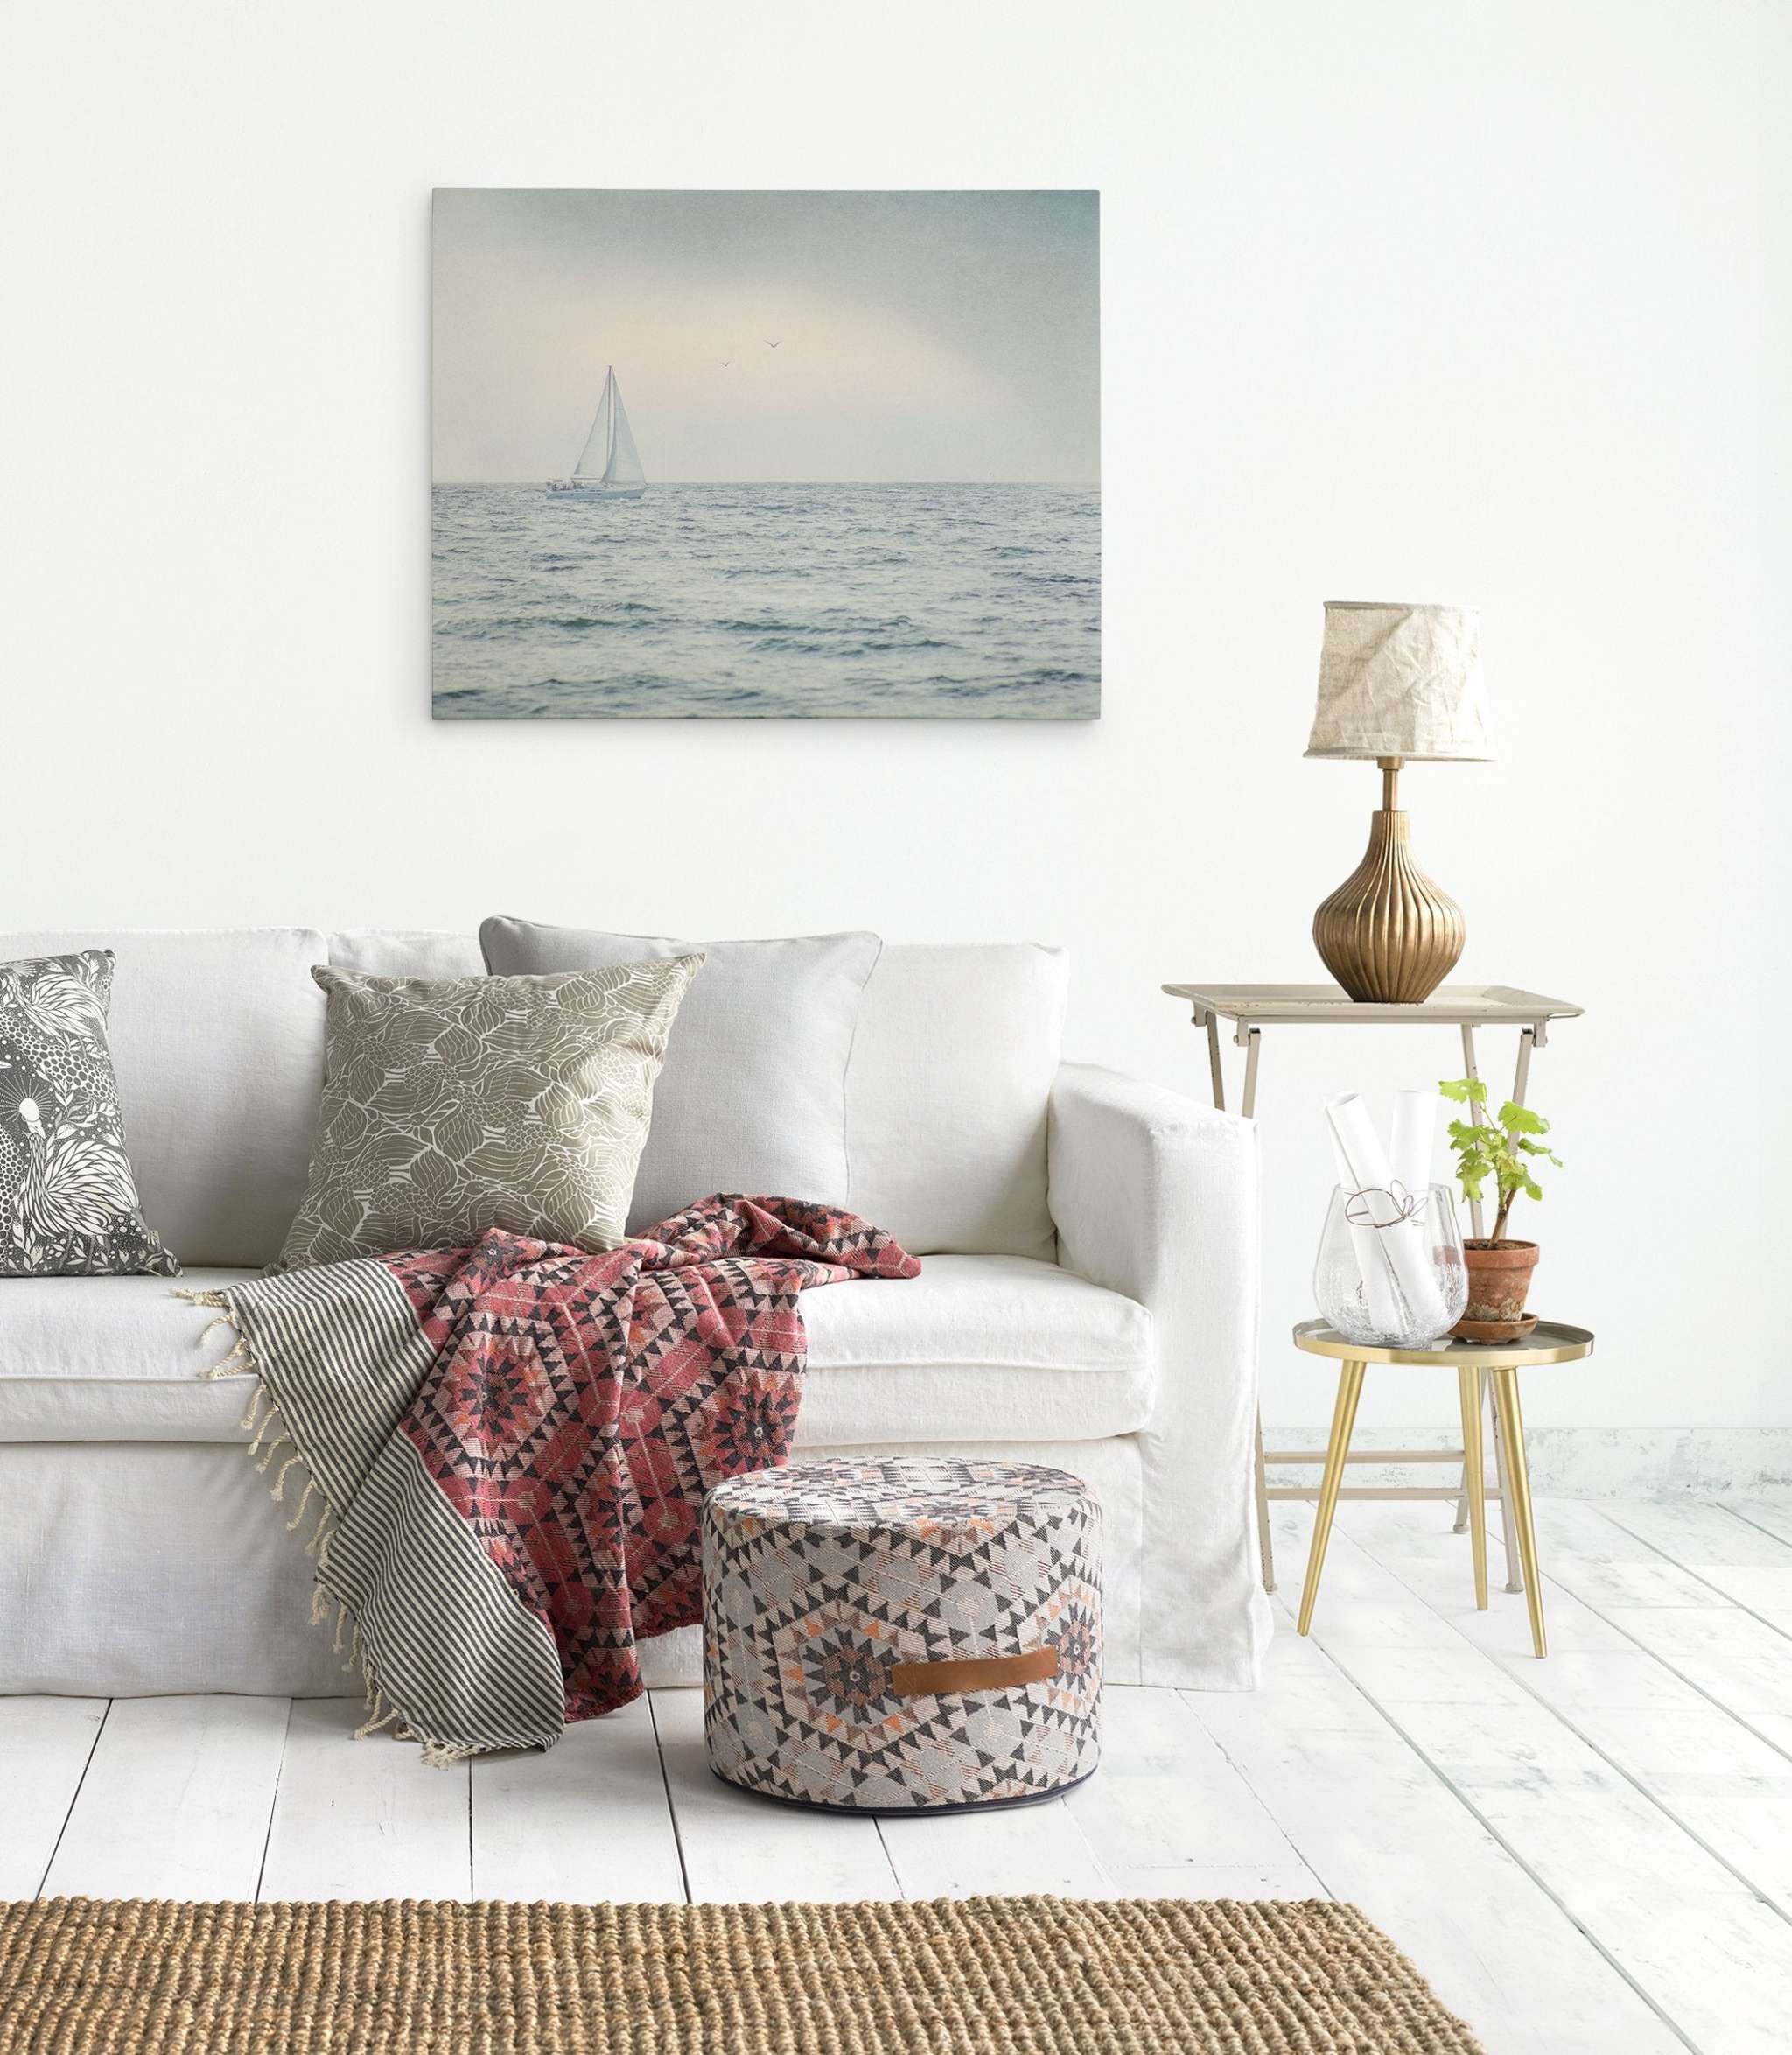 A cozy living room with a white sofa adorned with patterned pillows and a red throw blanket. A textured pouf and a side table with a lamp and plant complete the setup. Behind the sofa, Offley Green's Nautical Sail Boat Canvas Art, 'Sailing Into Rain' on premium artist-grade canvas adds an elegant touch to the white wall.